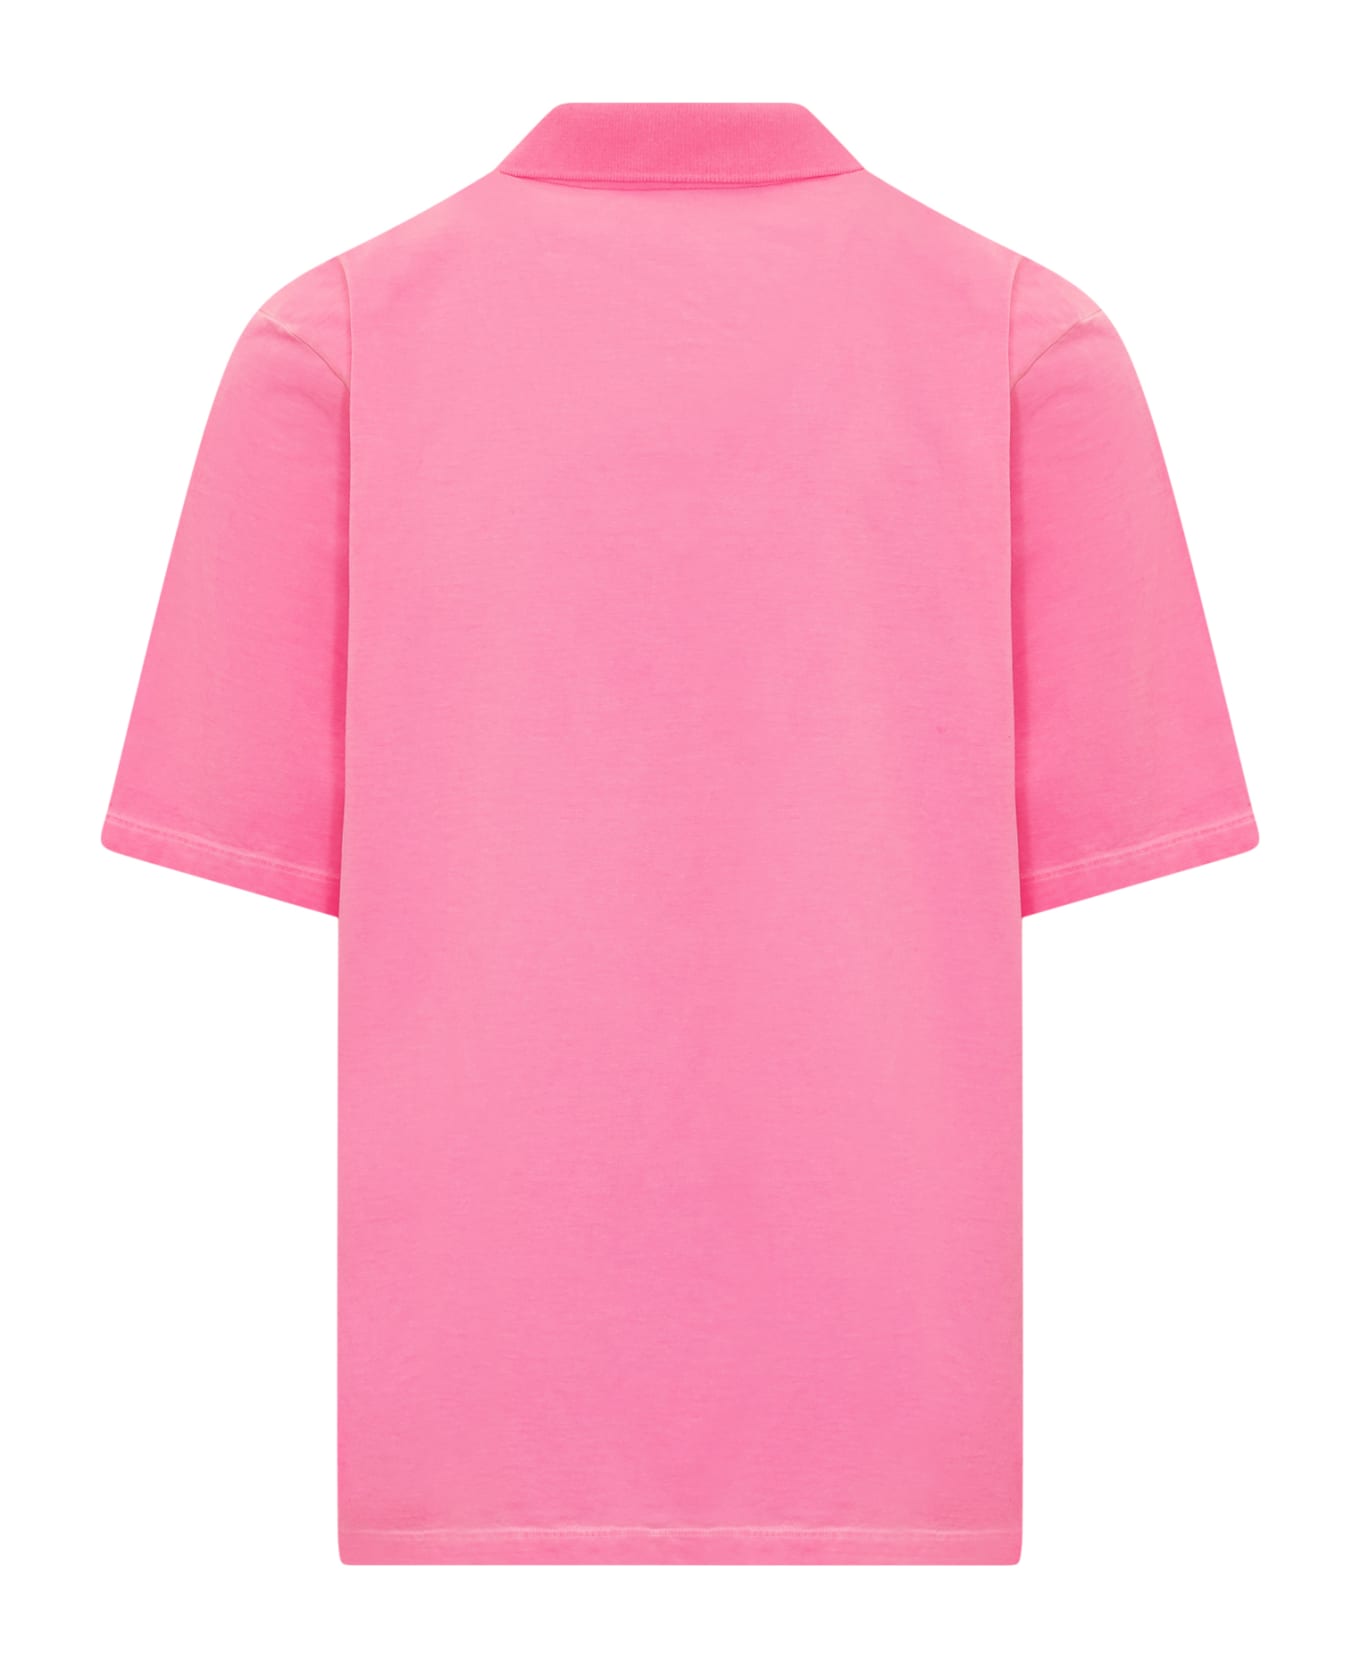 Dsquared2 Fish Skater Polo - PINK FLUO